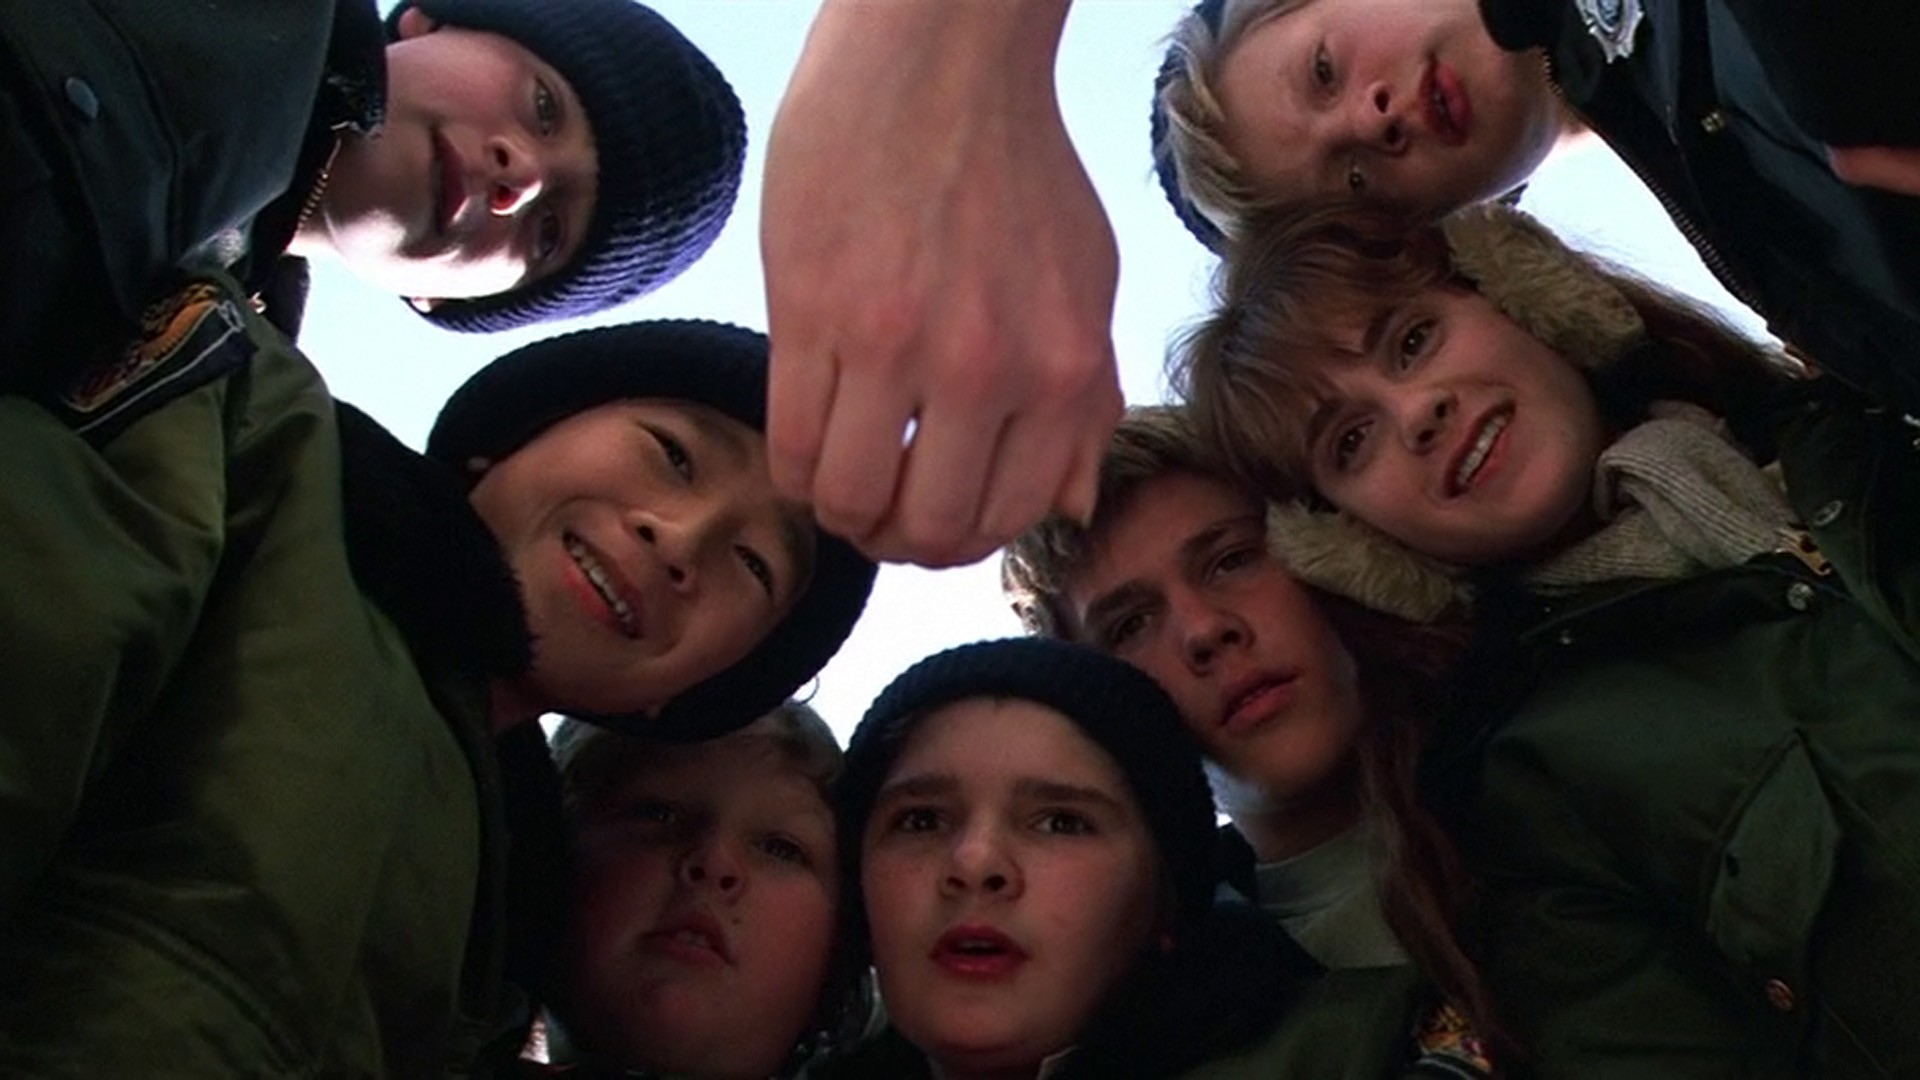 Goonies never say die — and neither do rumors about a Goonies sequel. But recent comments from Goonies director Richard Donner suggest a sequel may no ...